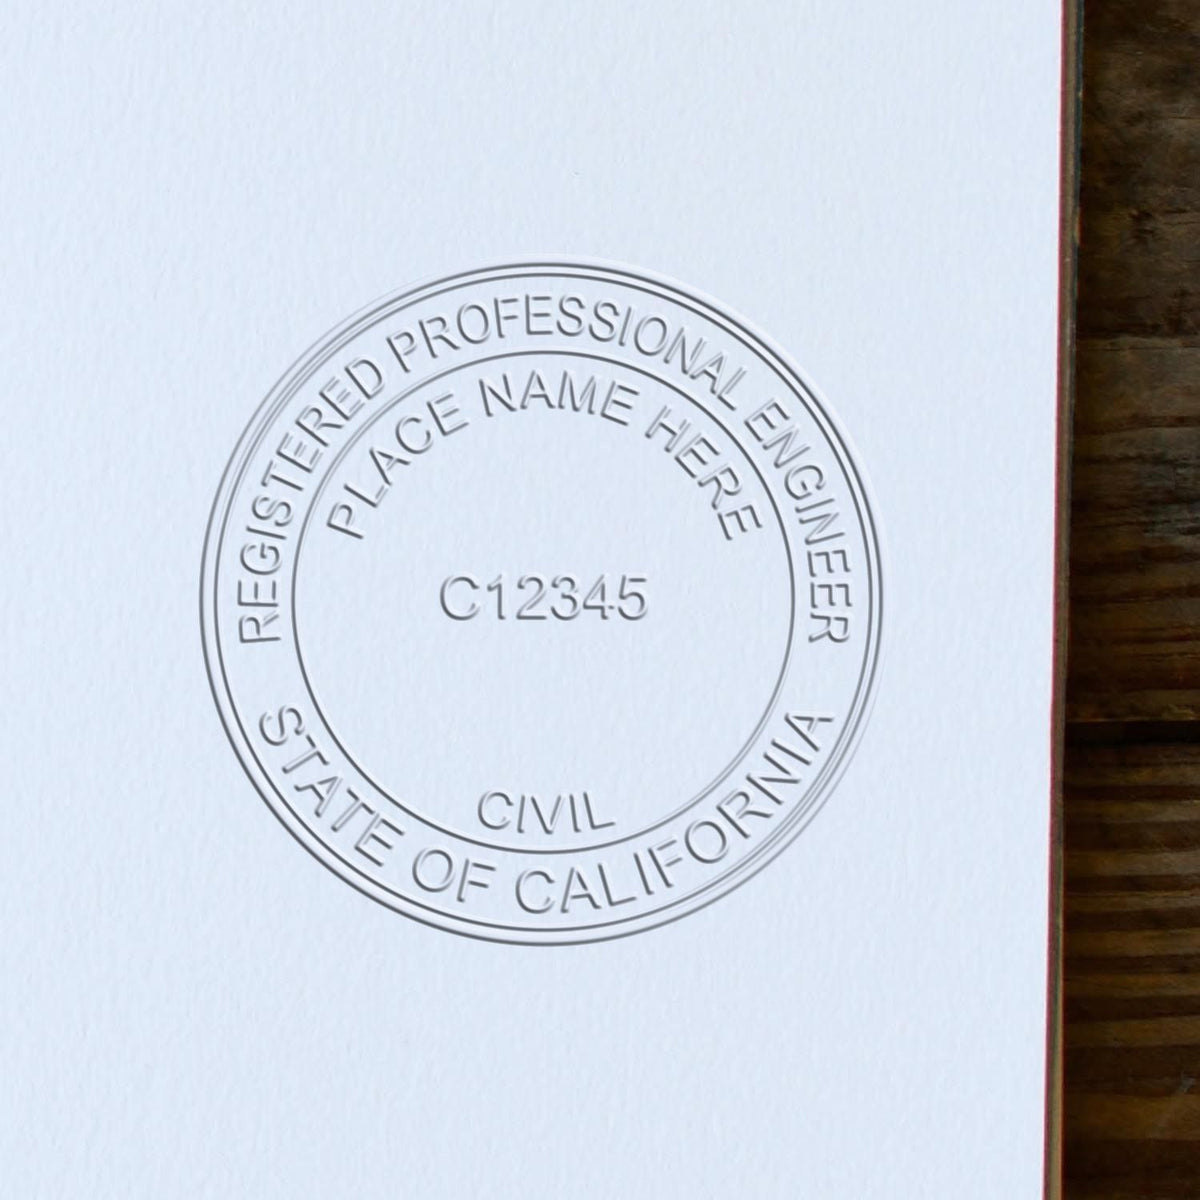 The Gift California Engineer Seal stamp impression comes to life with a crisp, detailed image stamped on paper - showcasing true professional quality.